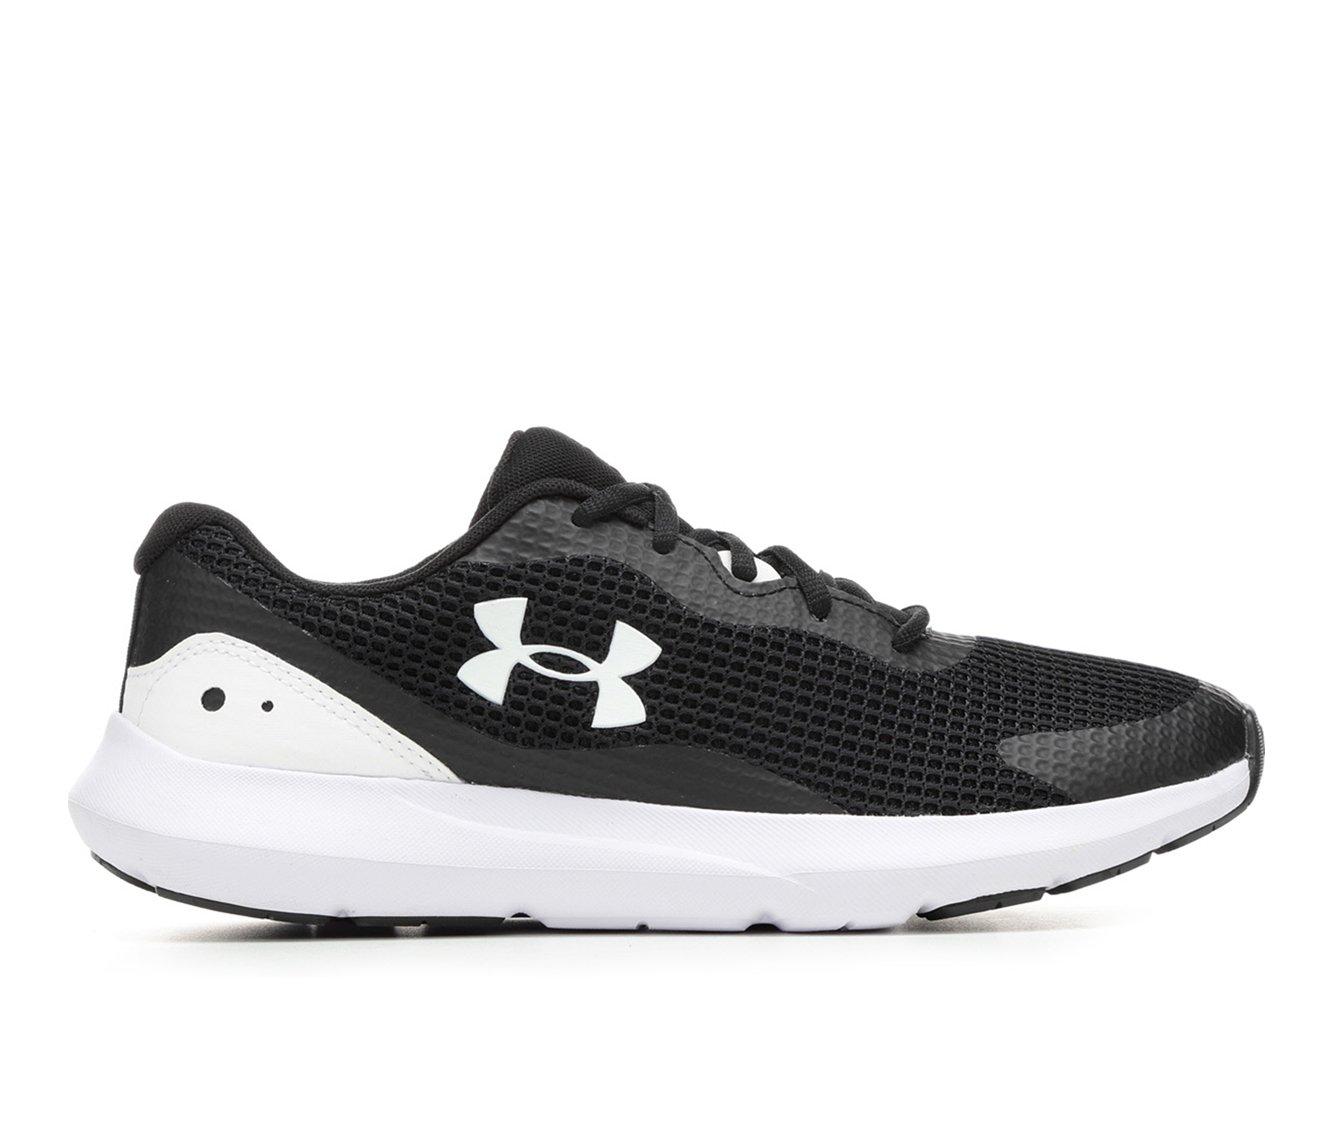 Men's Under Armour Surge 3 Running Shoes | Shoe Carnival